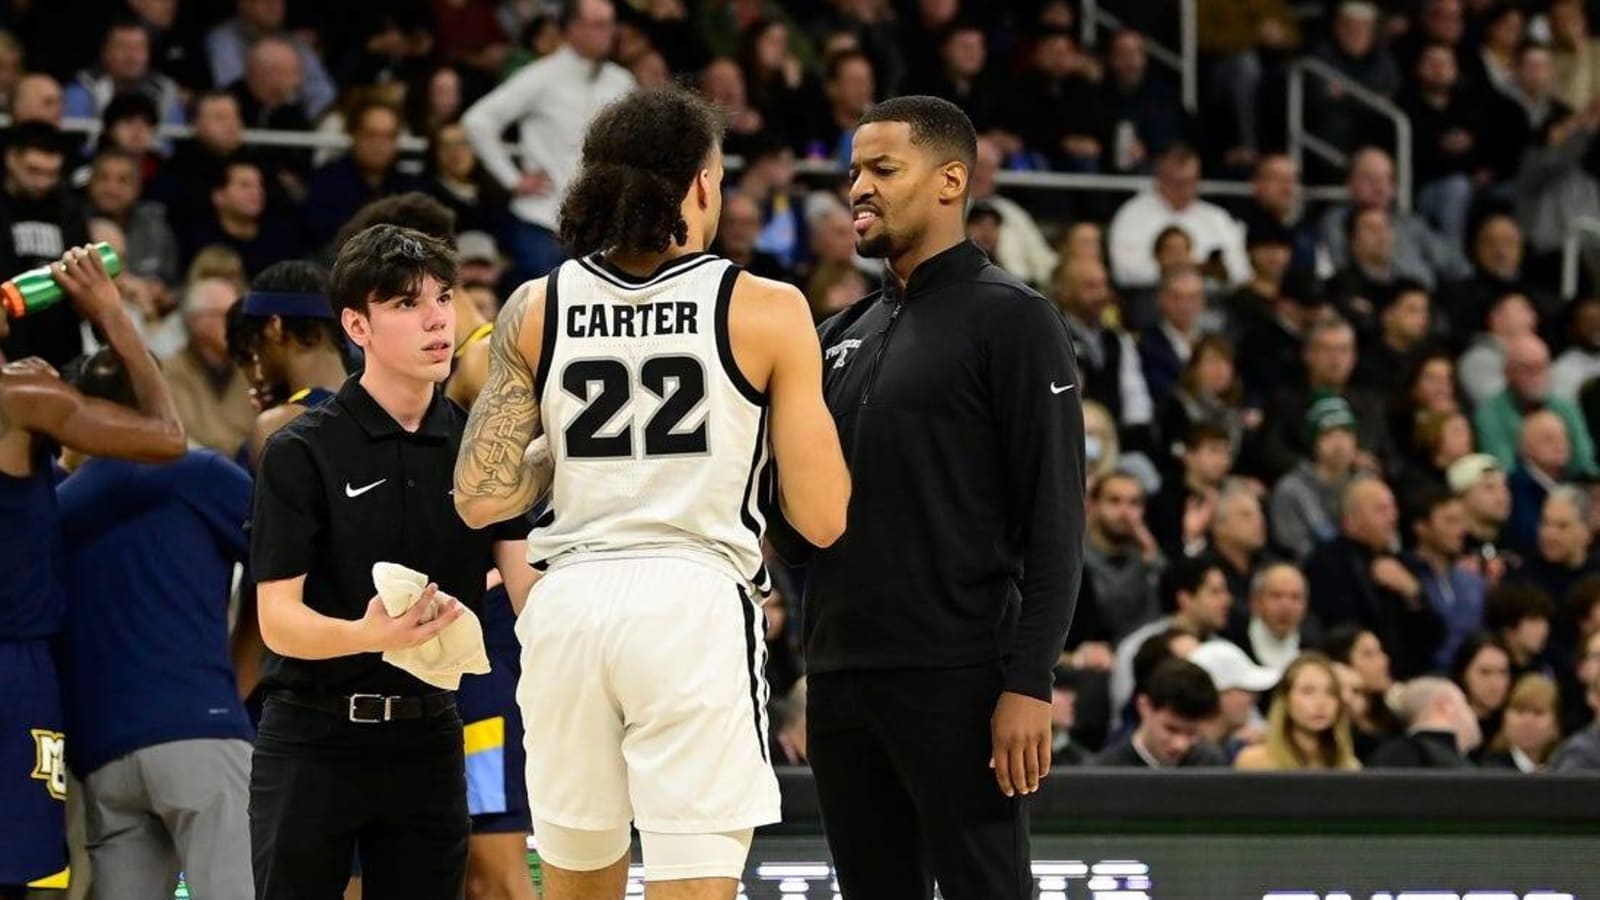 Adjusting without Bryce Hopkins, Providence hosts Xavier